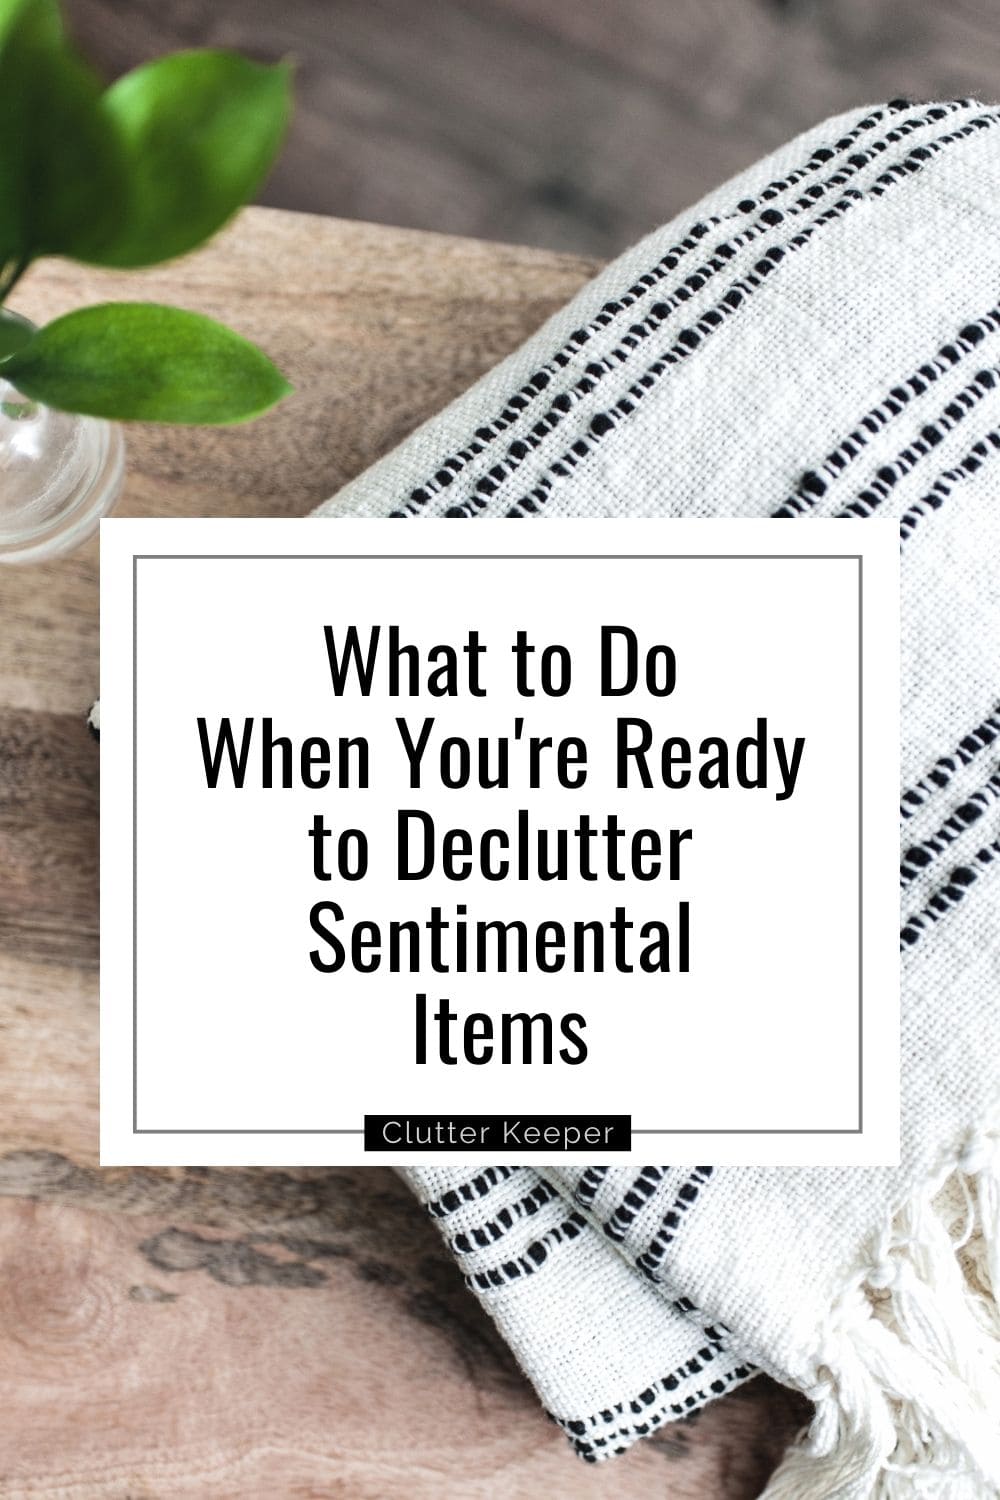 What to do when you're ready to declutter sentimental items.